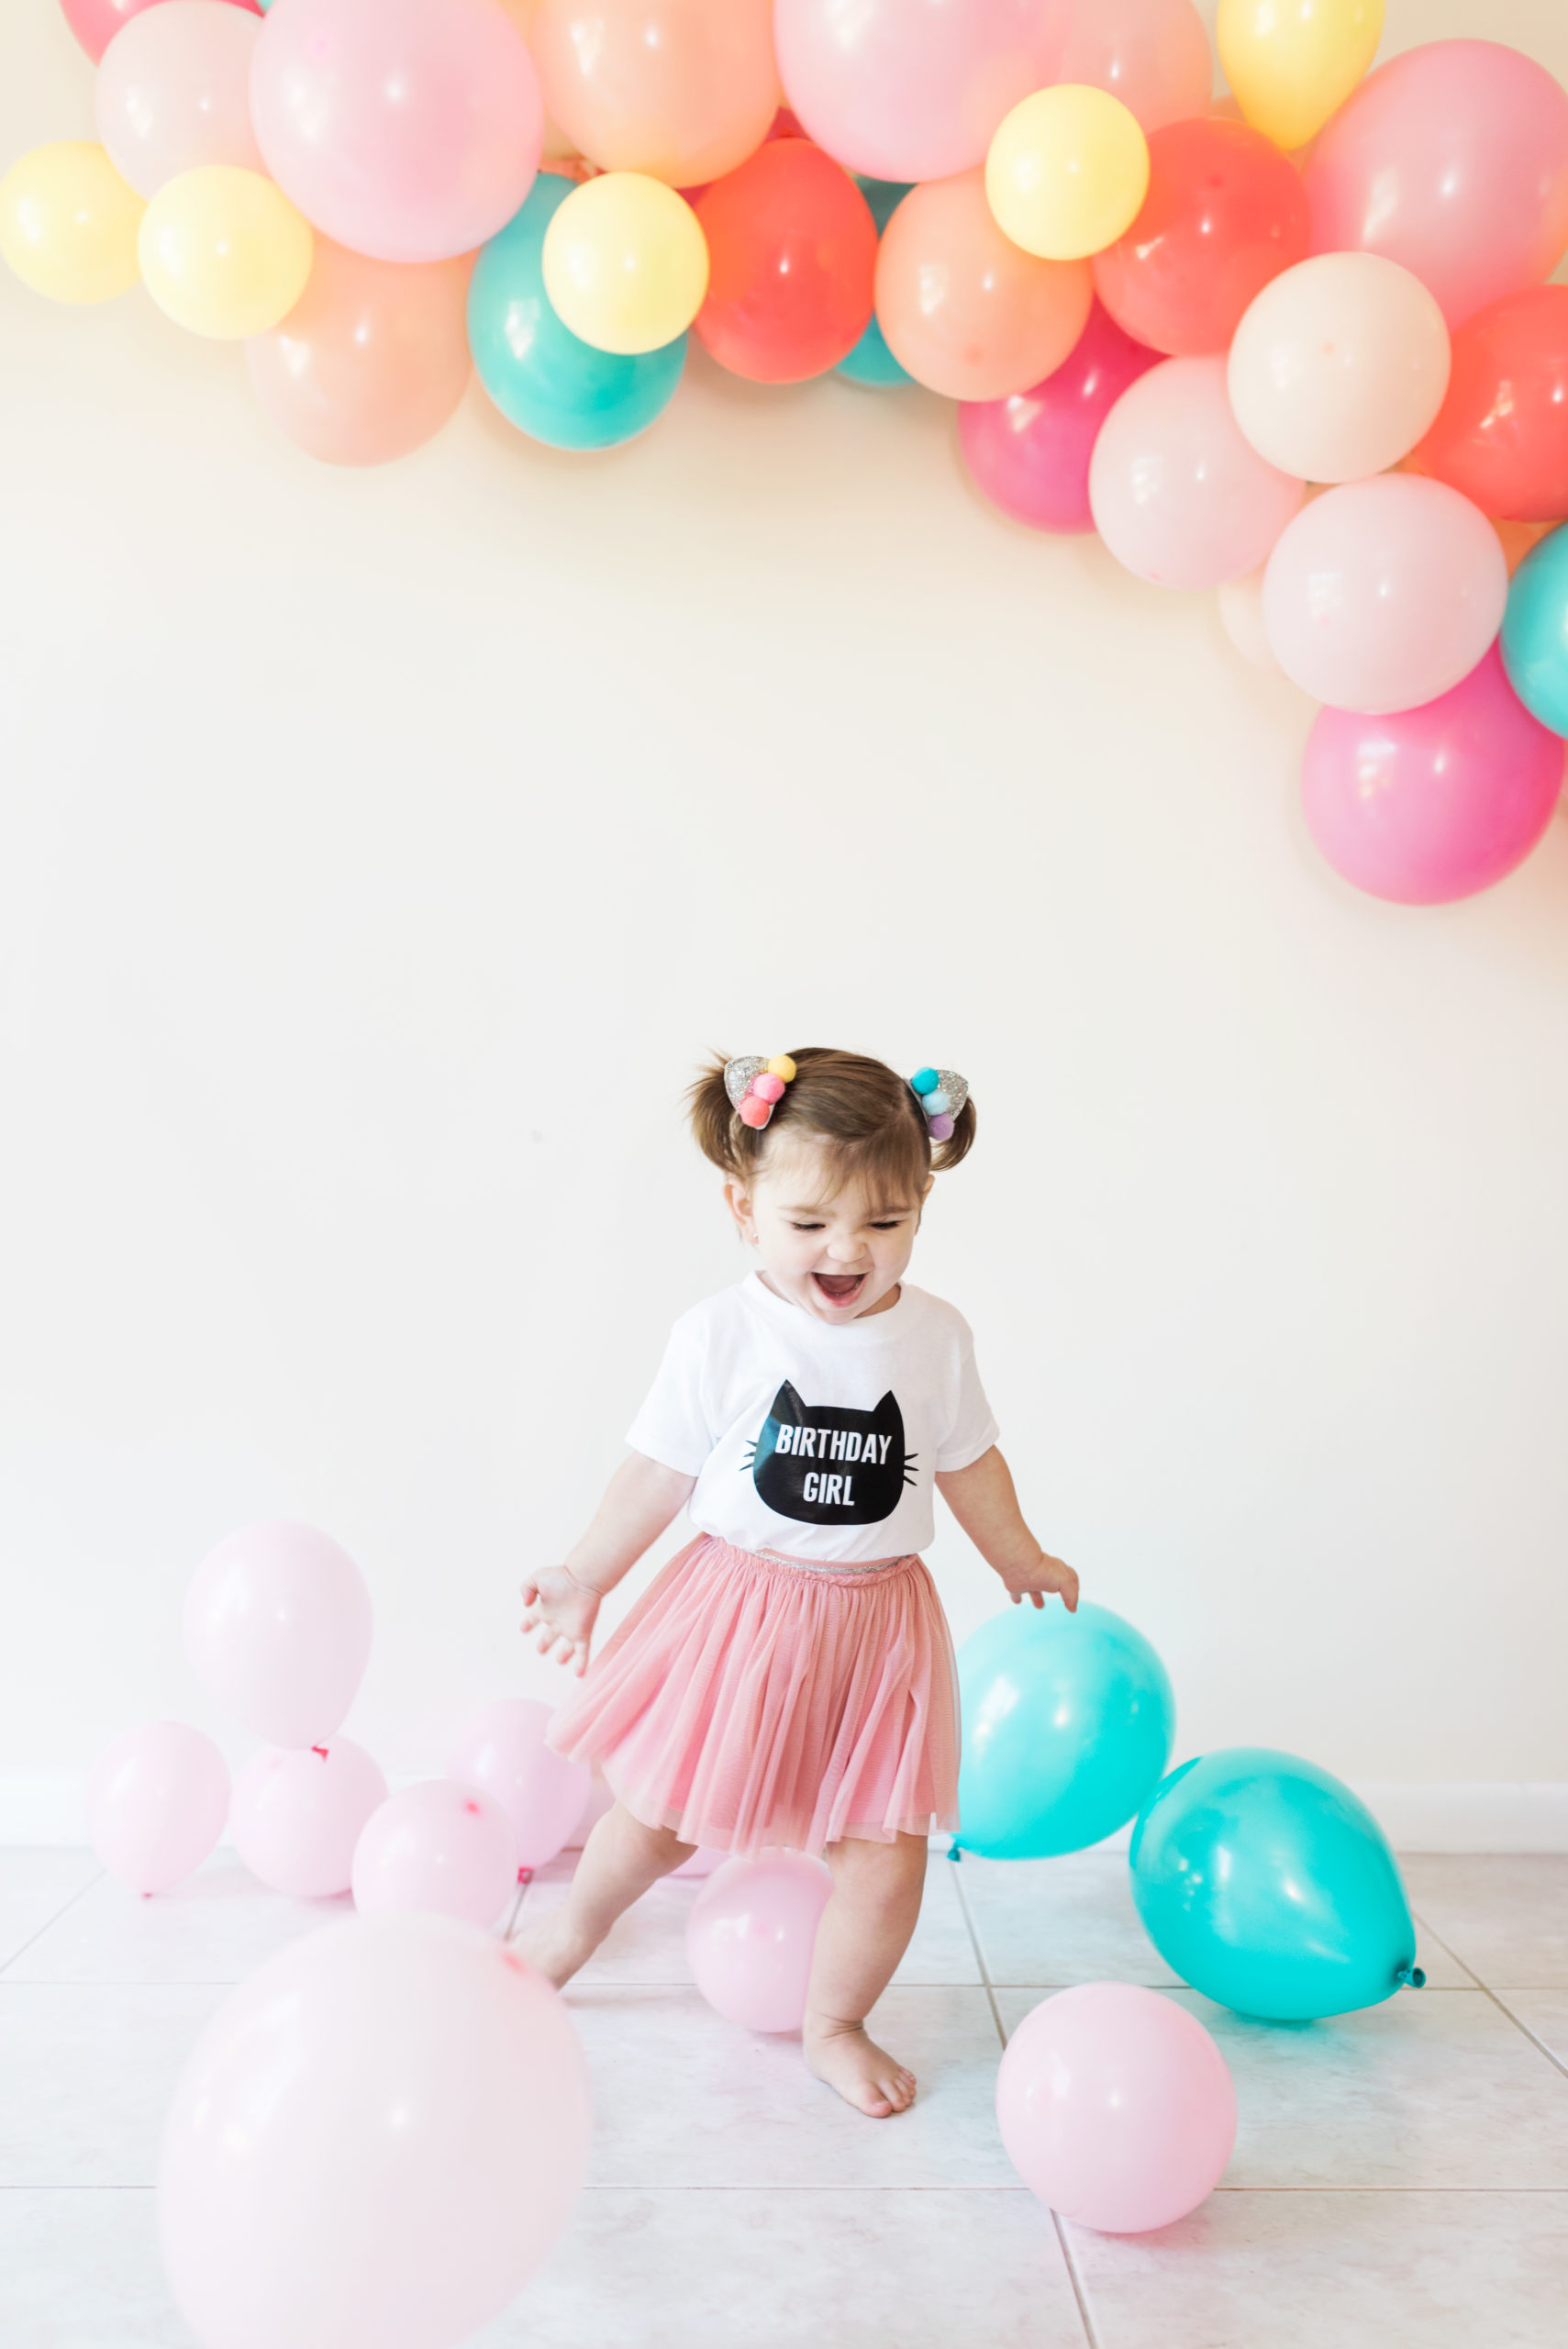 child kicking balloons on floor in birthday outfit